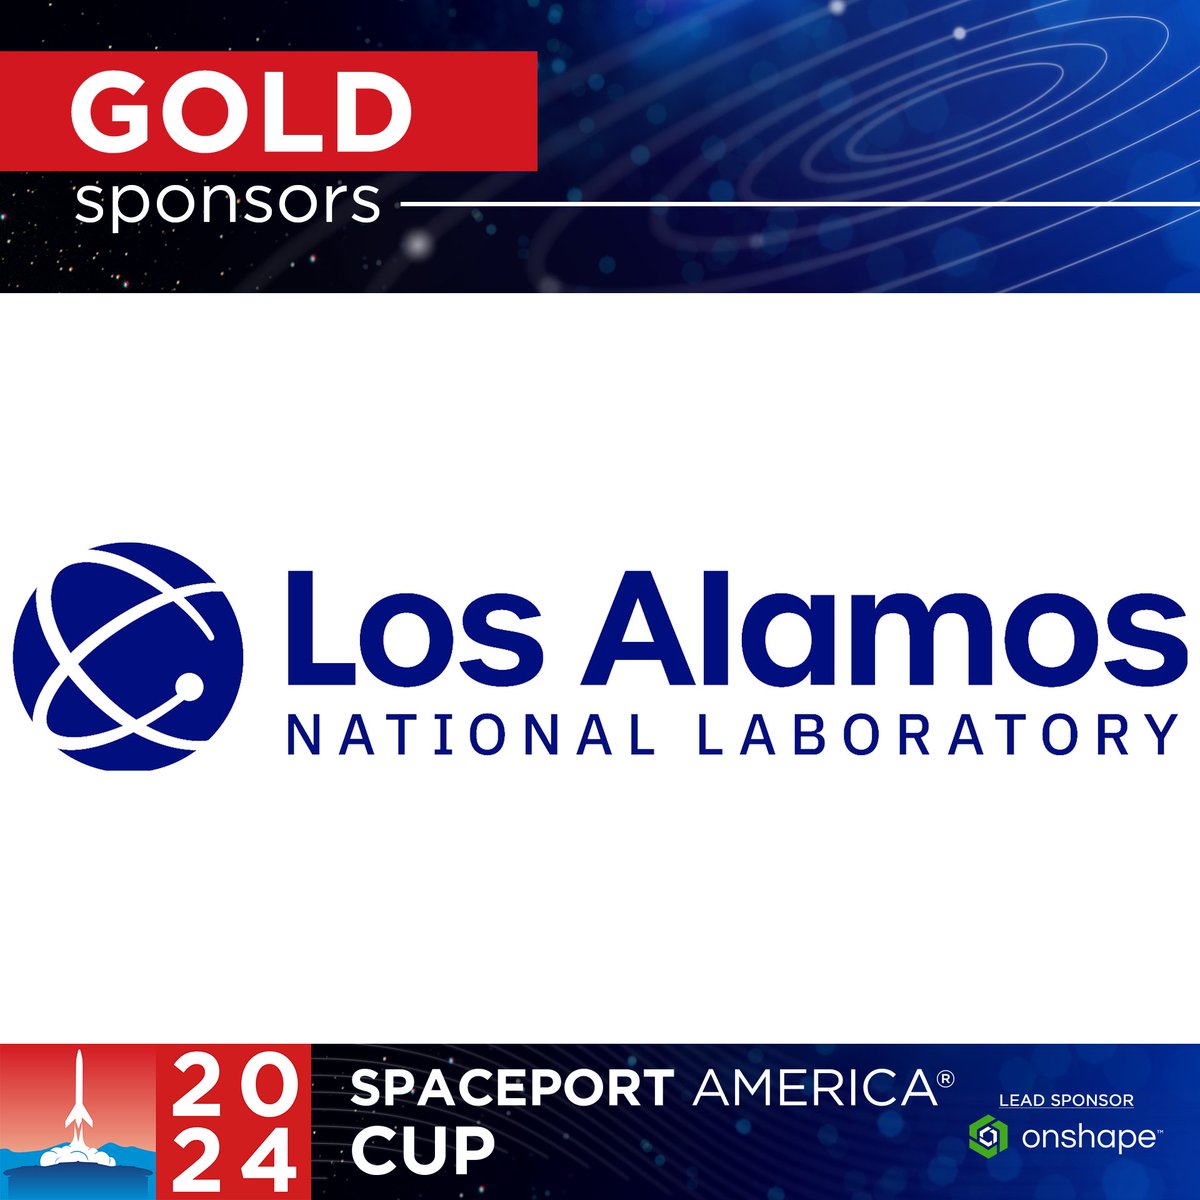 Liftoff with @LosAlamosNatLab 🚀 We’re about one month away from the start of the Cup, and we’re proud to announce LANL is on board as a supporter! ✨